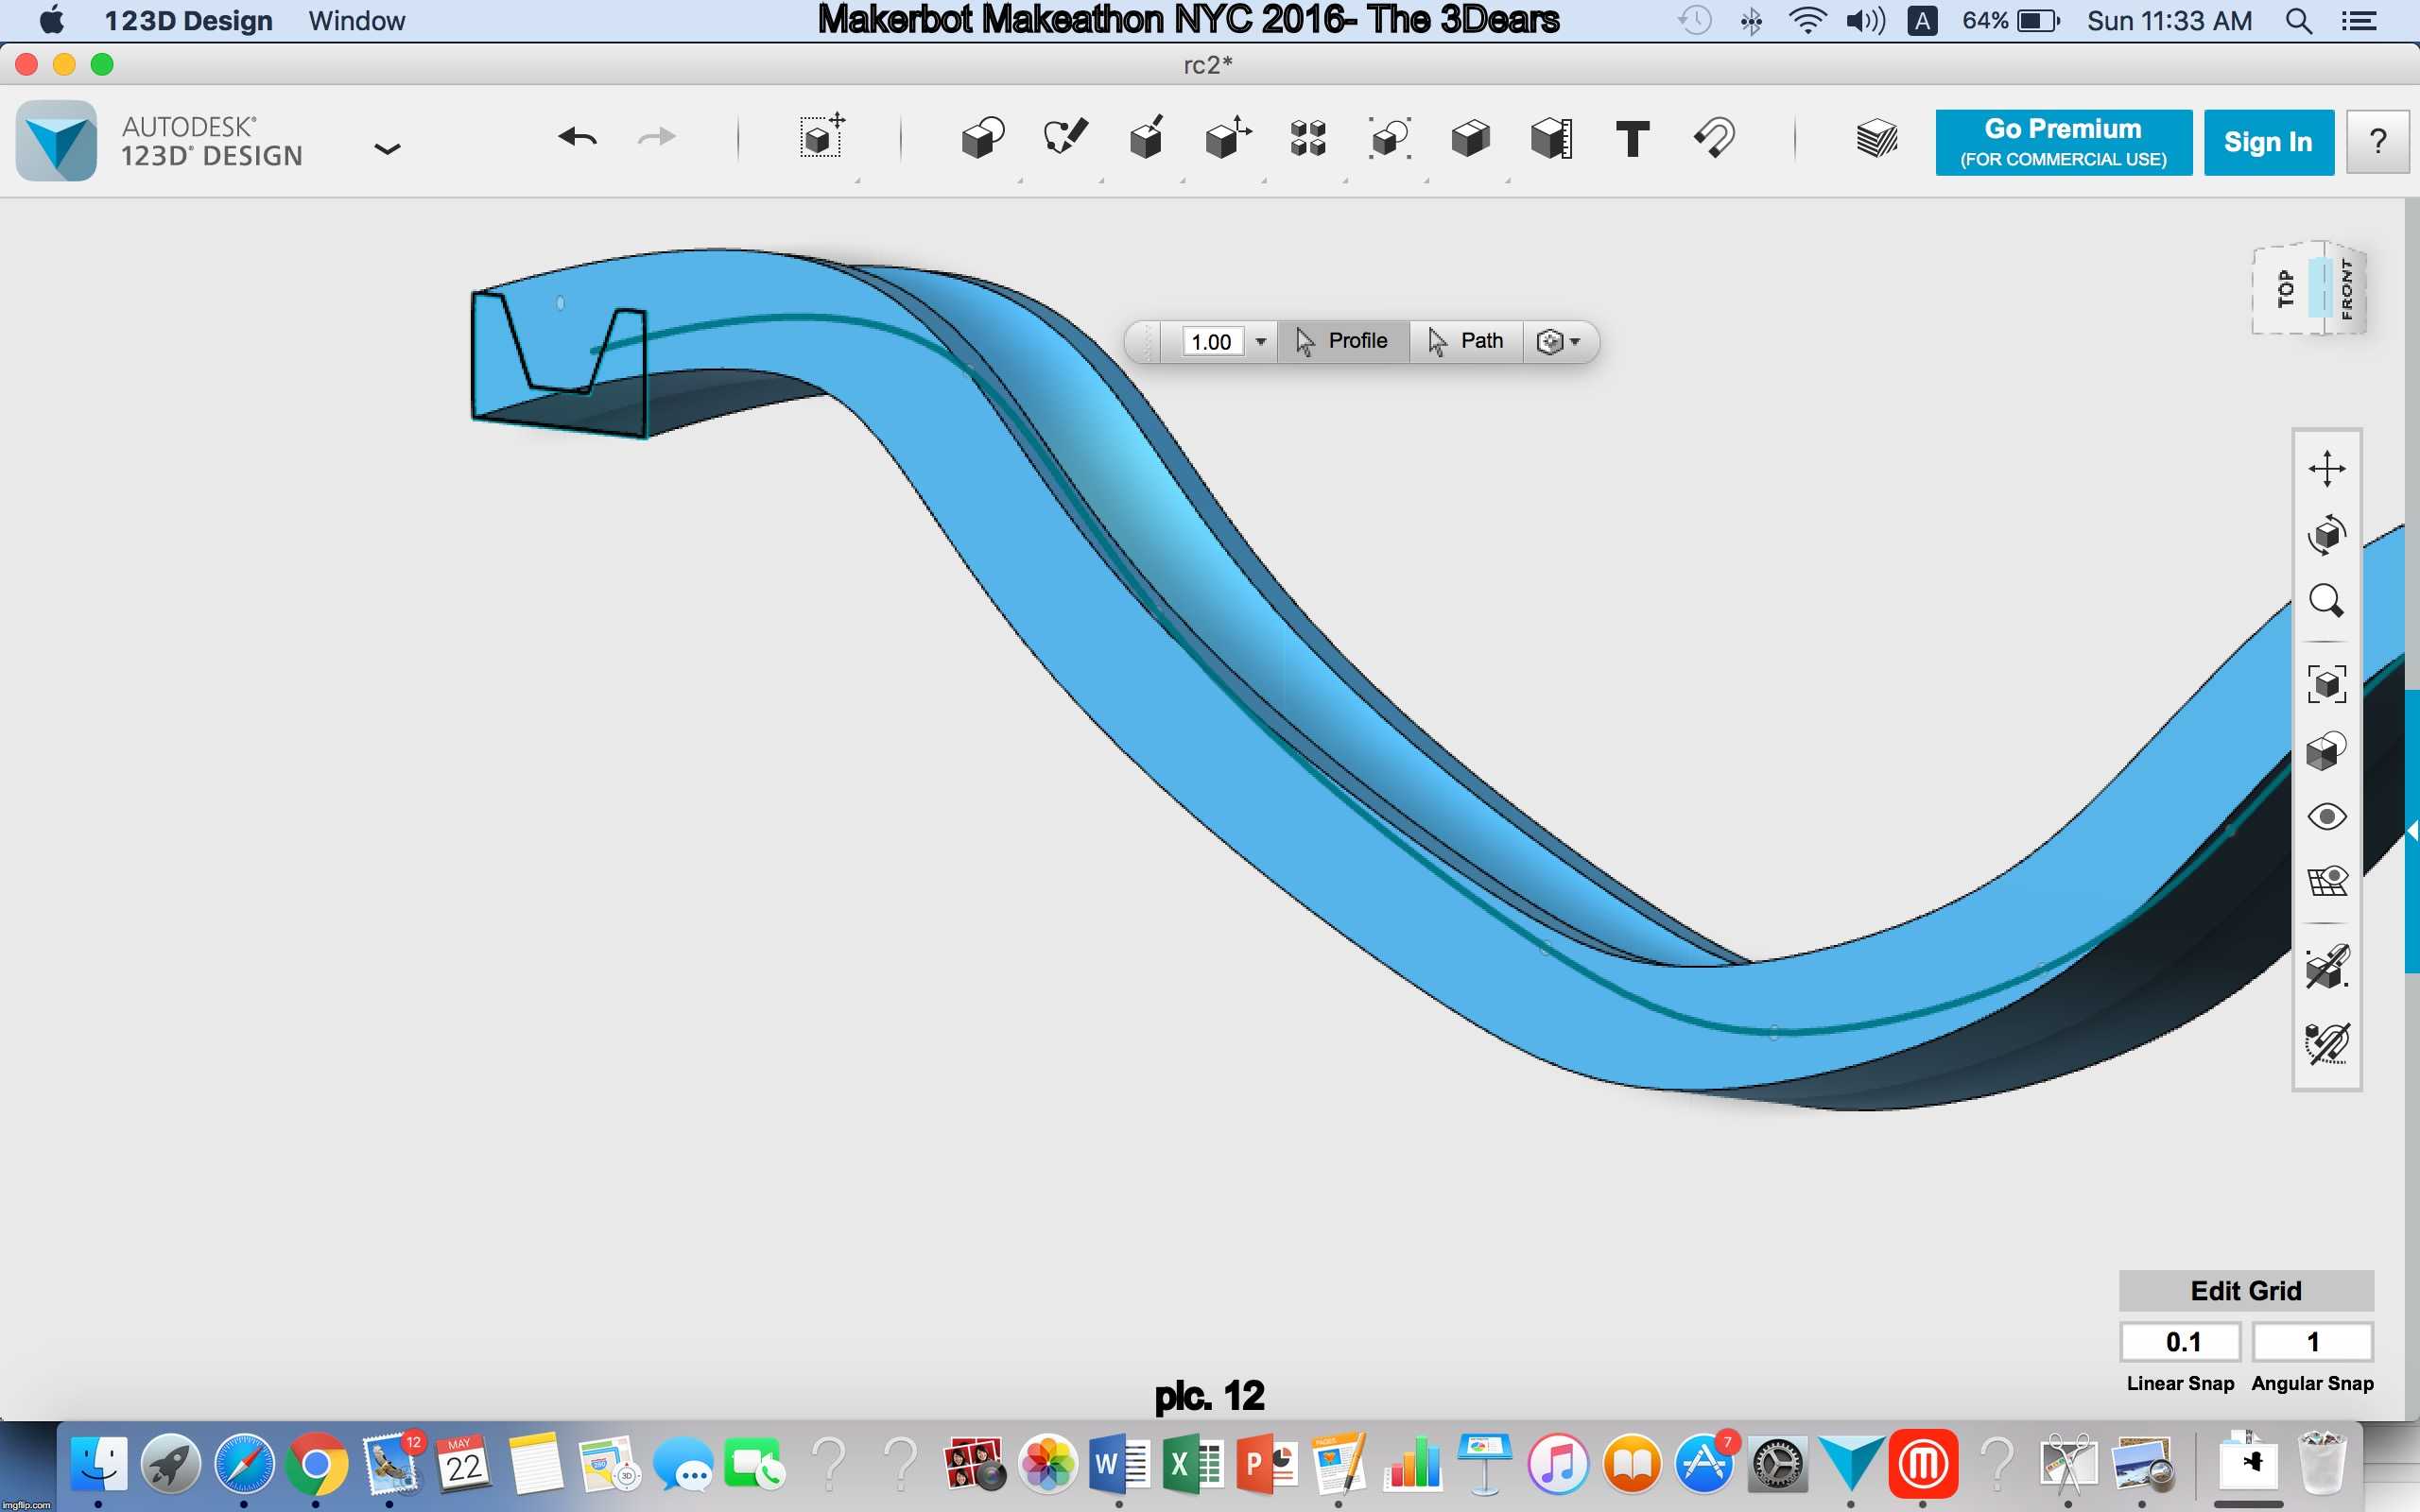 Analyzing Graphs Worksheet or Designing A Mathematical Rollercoaster by A Lman Thingiverse